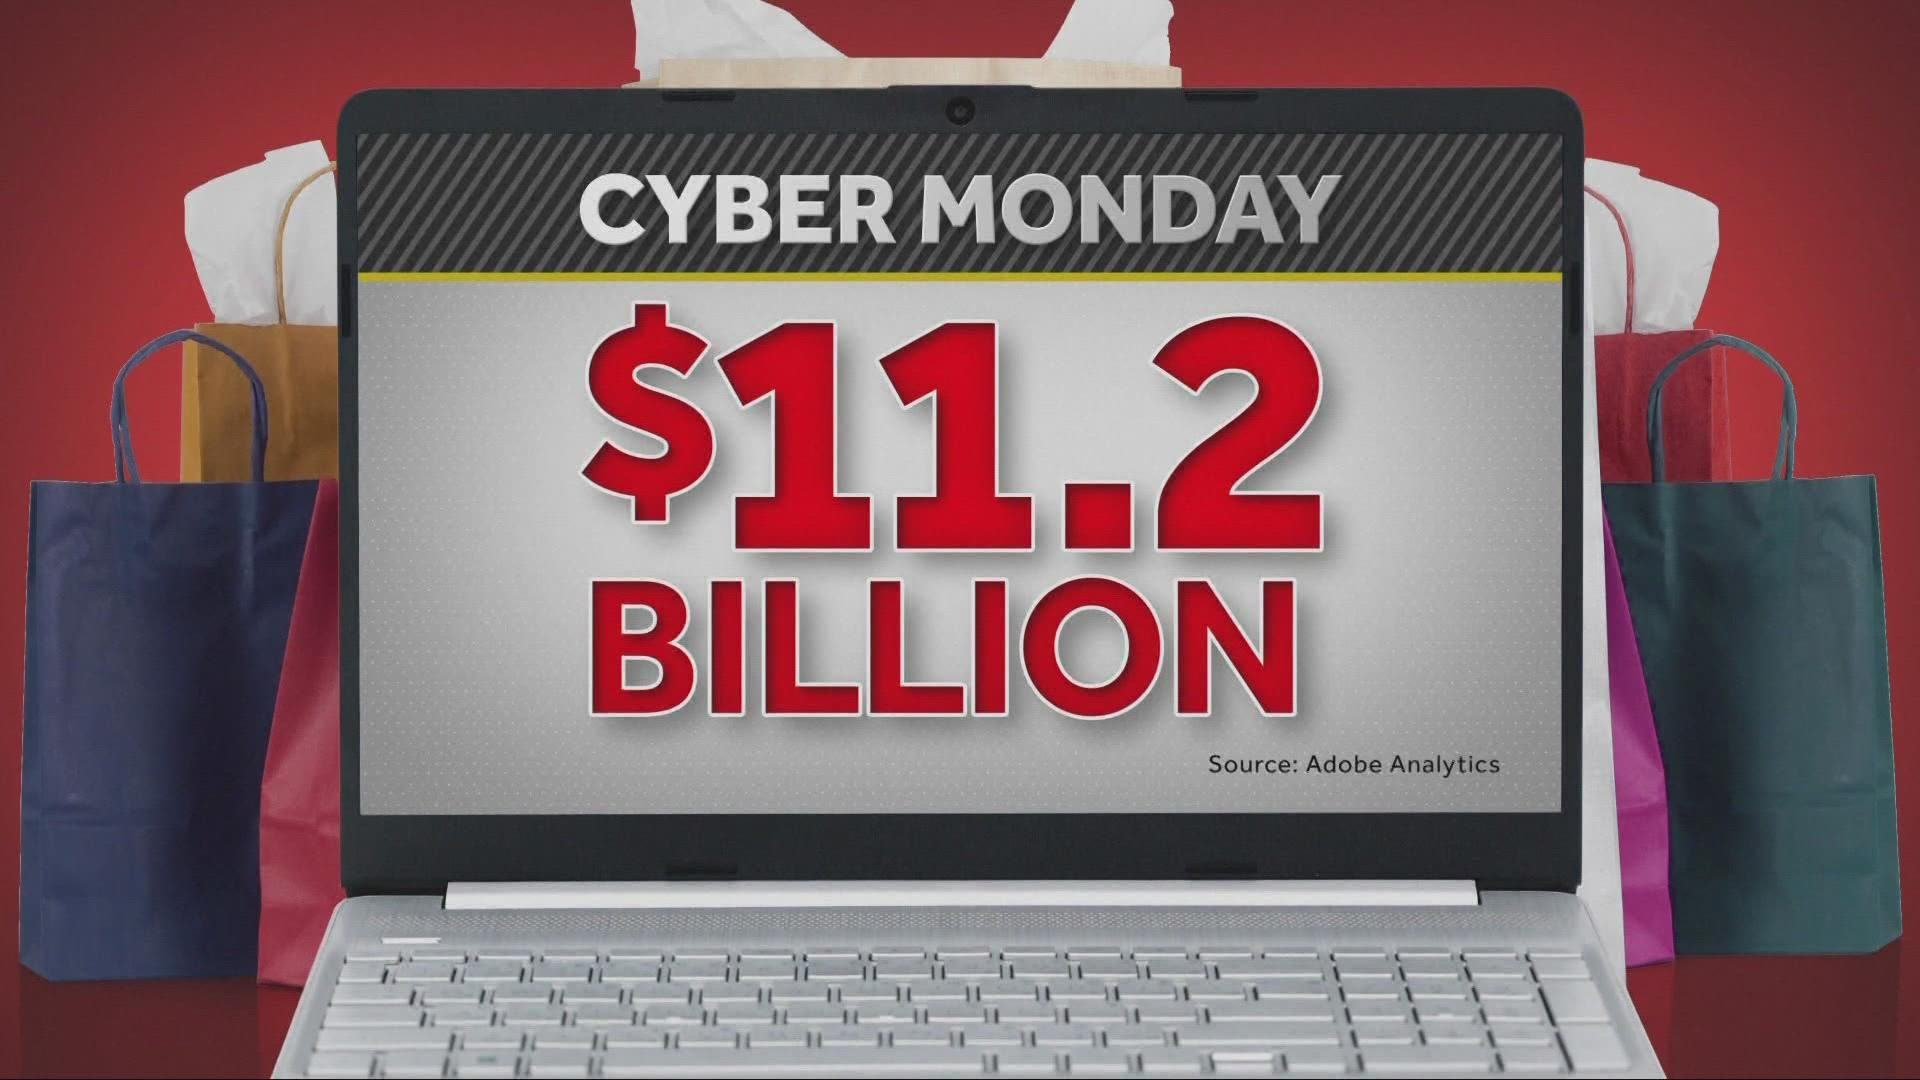 Cyber Monday has arrived -- and it's expected to be one of the biggest shopping days ever.